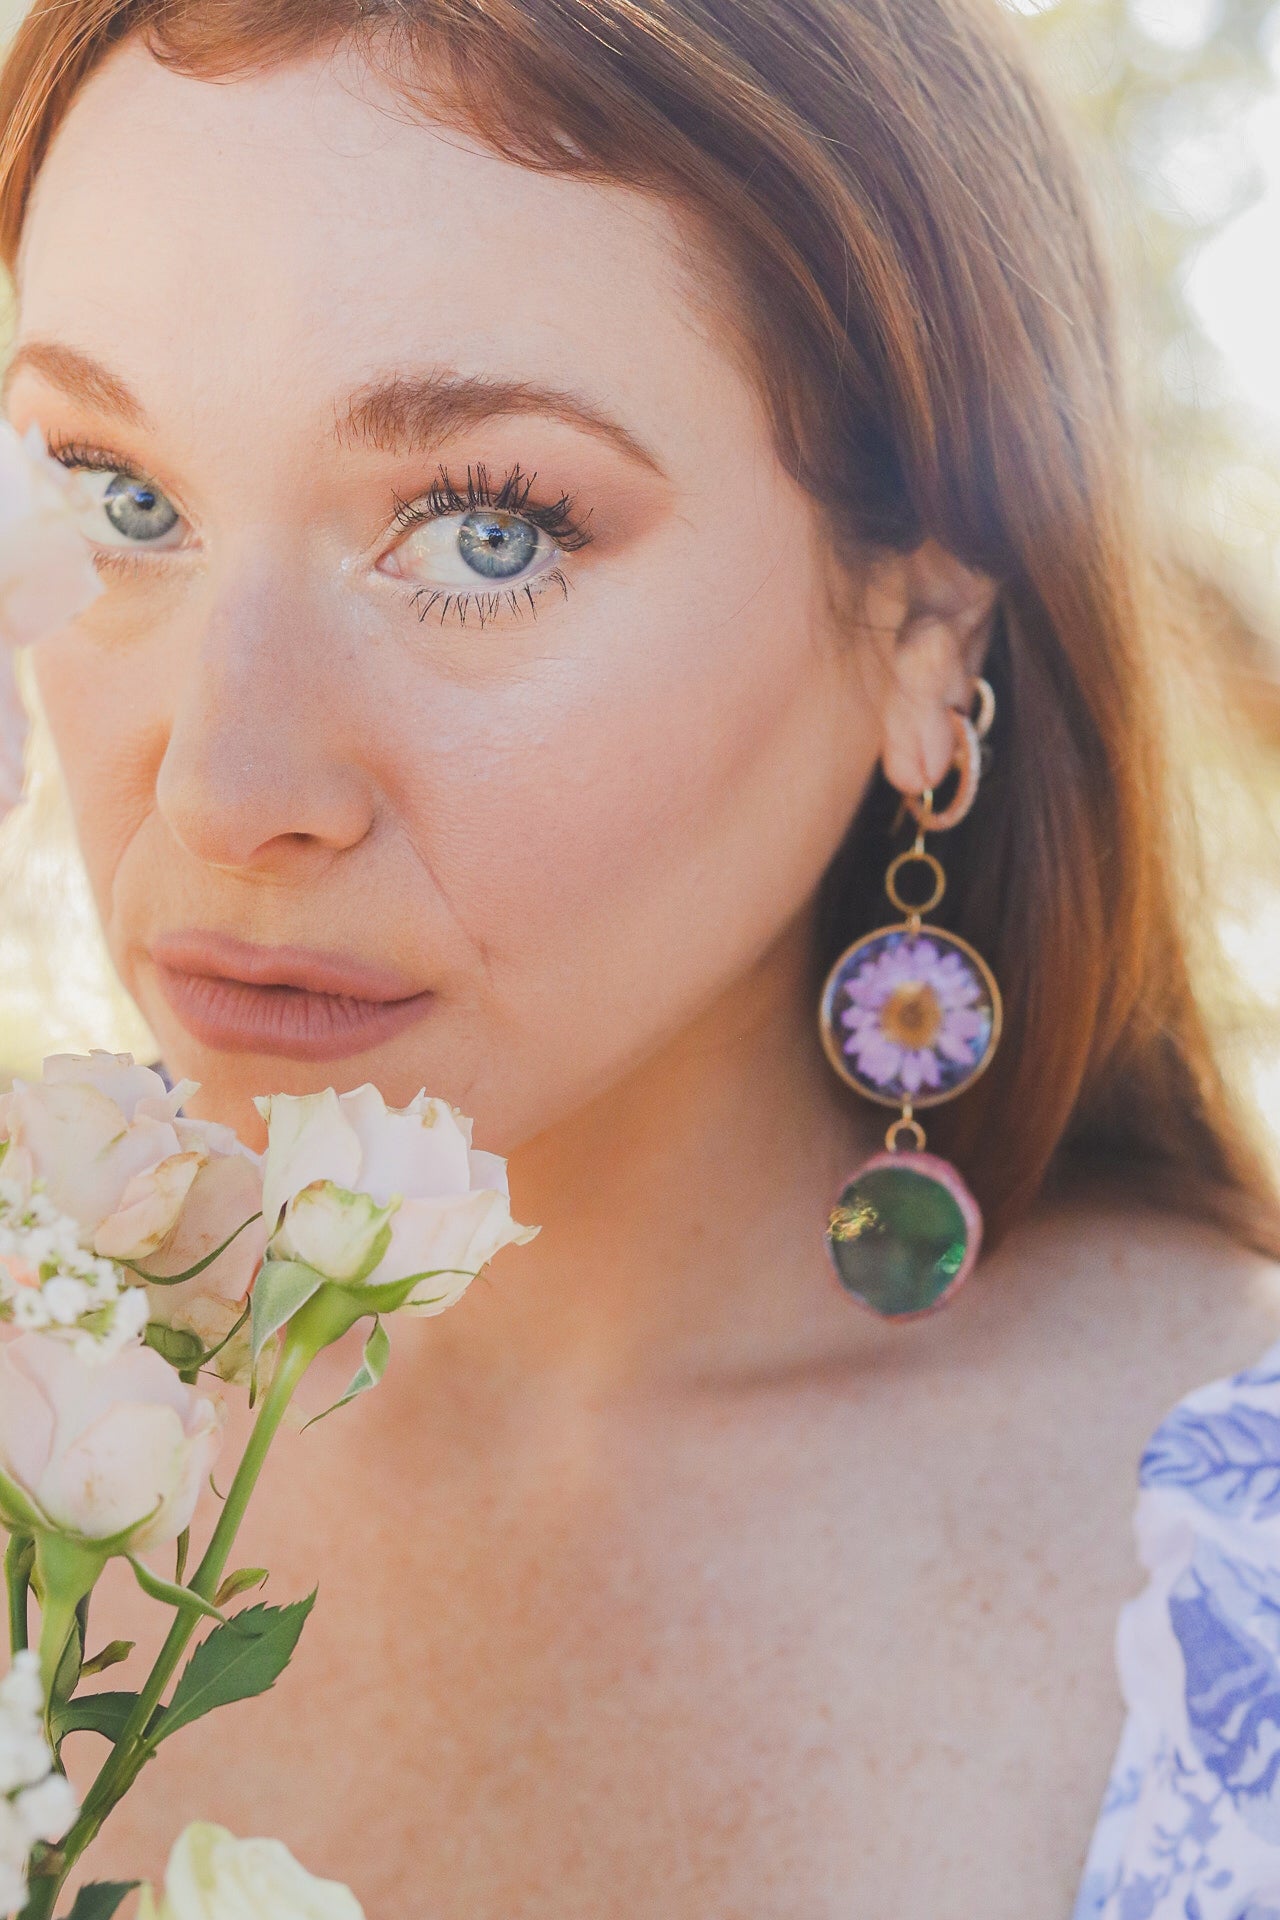 Botanical Beauty: Handmade Stained Glass Earrings by Magnolias Studios